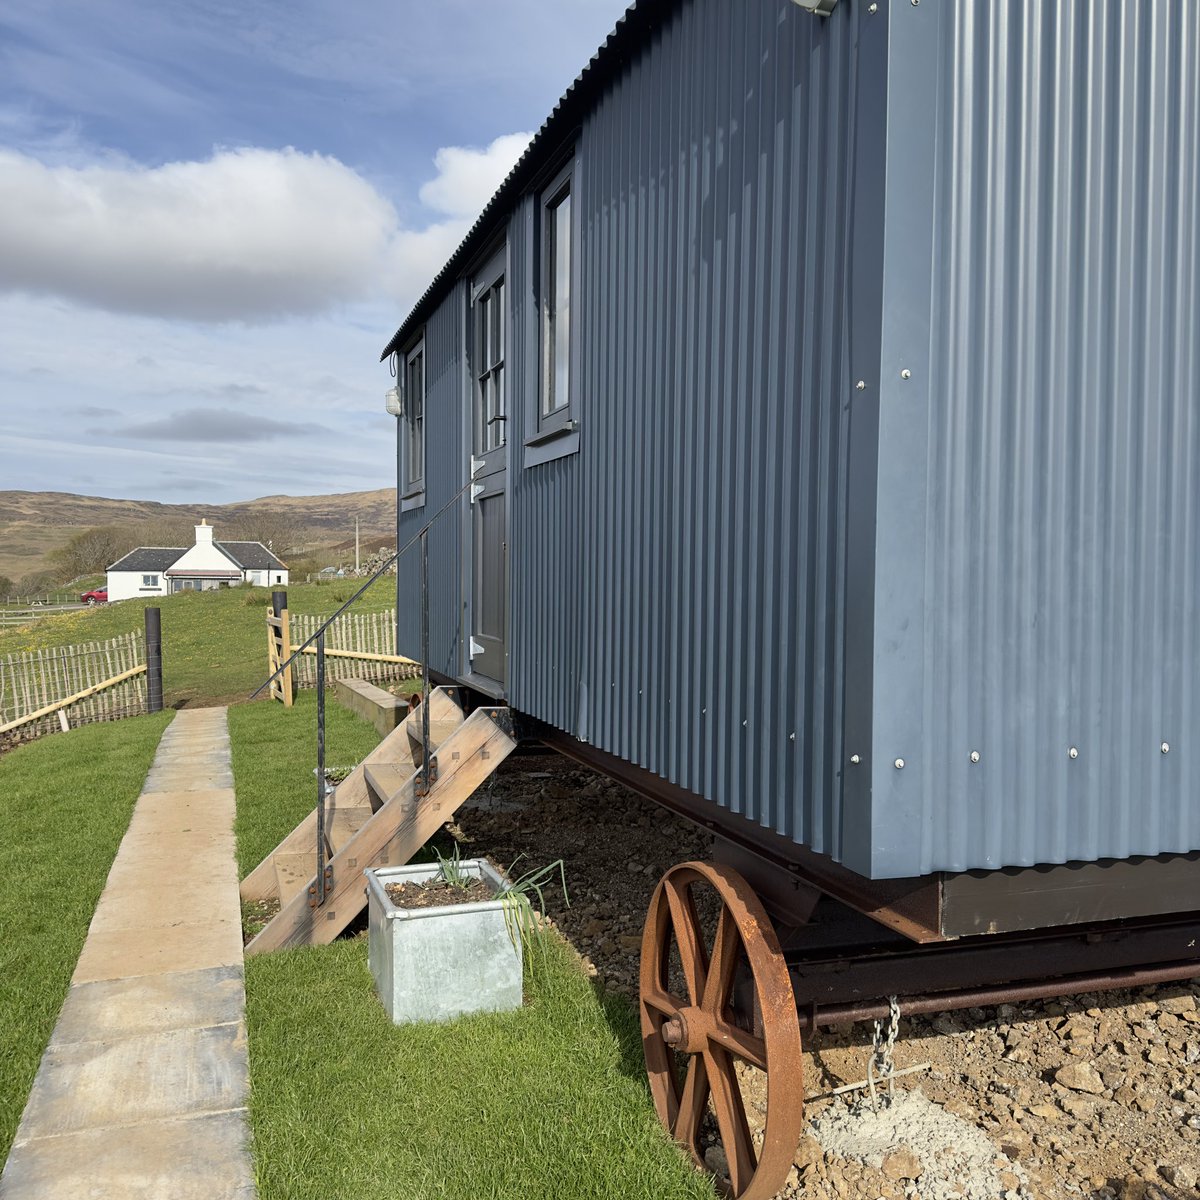 Last minute landscaping to our Shepherds Hut before first guests of the season next weekend. Plenty of availability over the summer for 3, 4 or 7 night stays.  #slowtourism Beautiful coastal farm, Wood fired outdoor bath, wood fired outdoor pizza oven. treshnish.co.uk/make-a-booking/